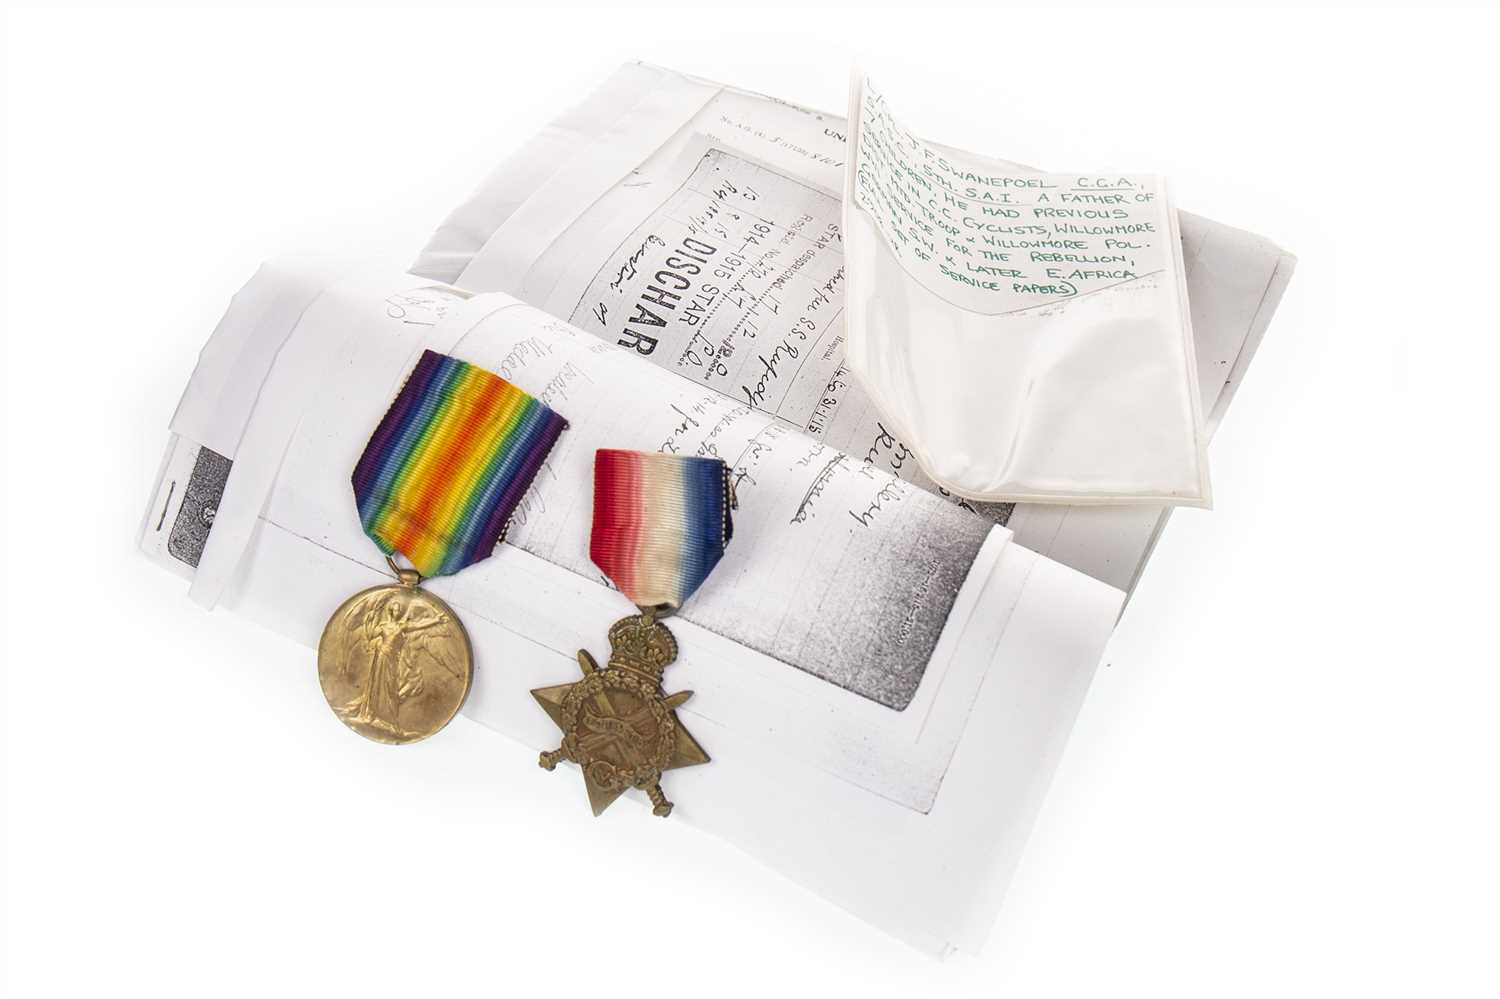 Lot 137 - A LOT OF TWO WWI SERVICE MEDALS AWARDED TO J.F. SWANEPOEL